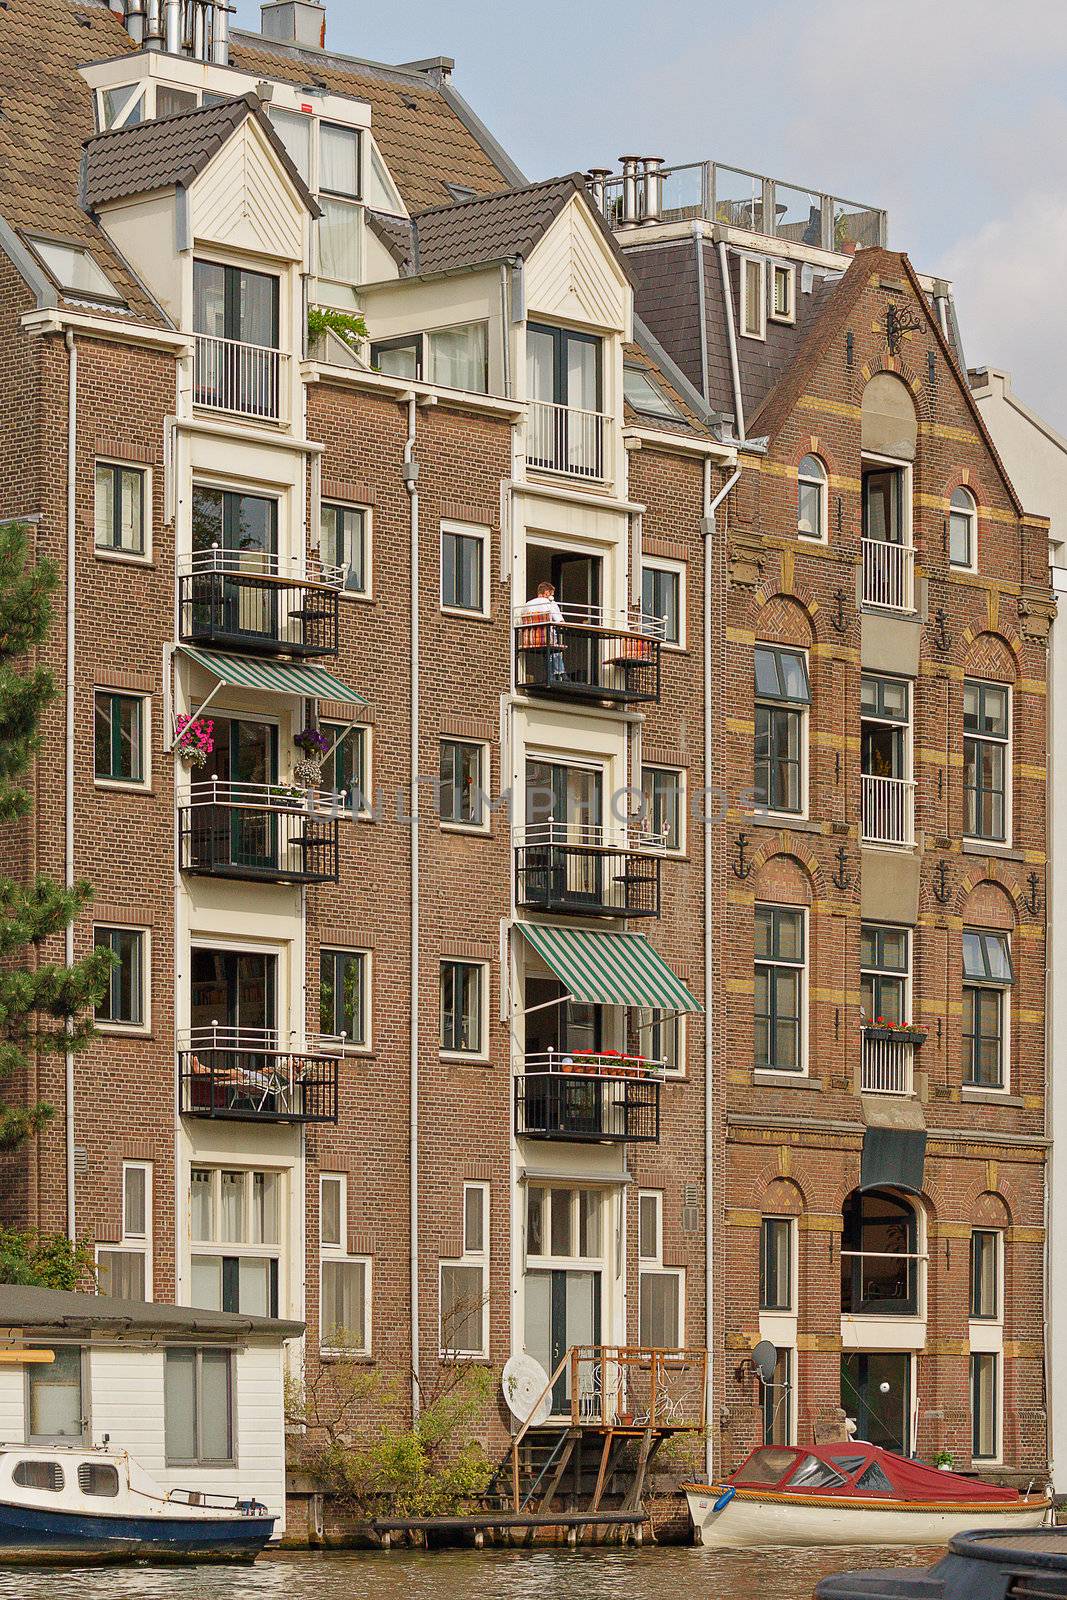 The famous canal houses in Amsterdam.